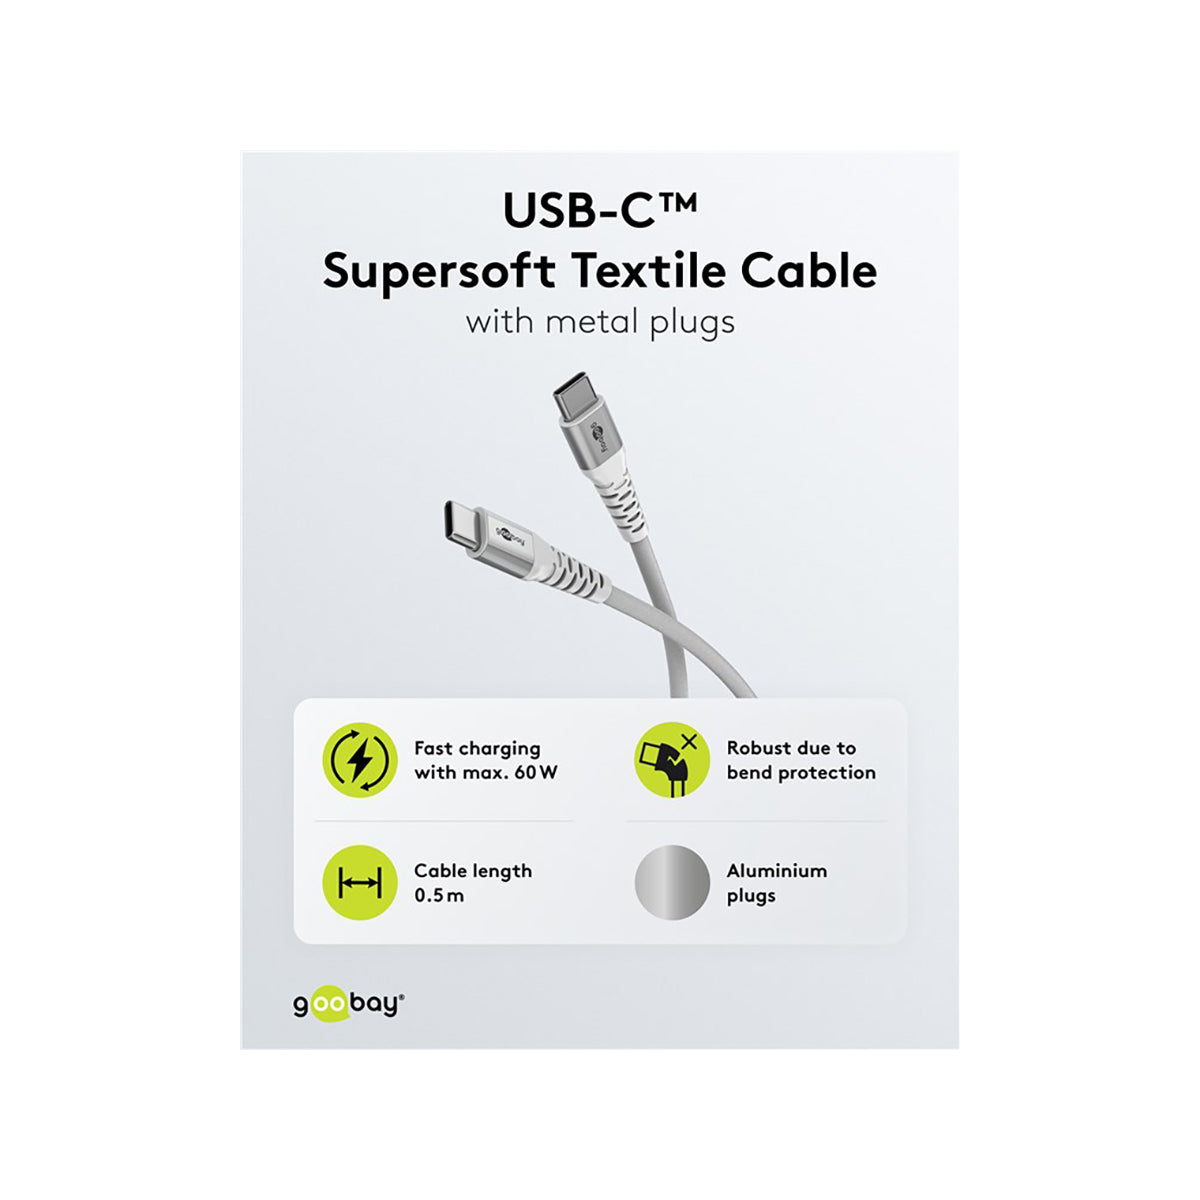 Goobay USB-C™ Supersoft Textile Cable with Metal Plugs 3 m for Smartphone/Tablets/Laptops - White